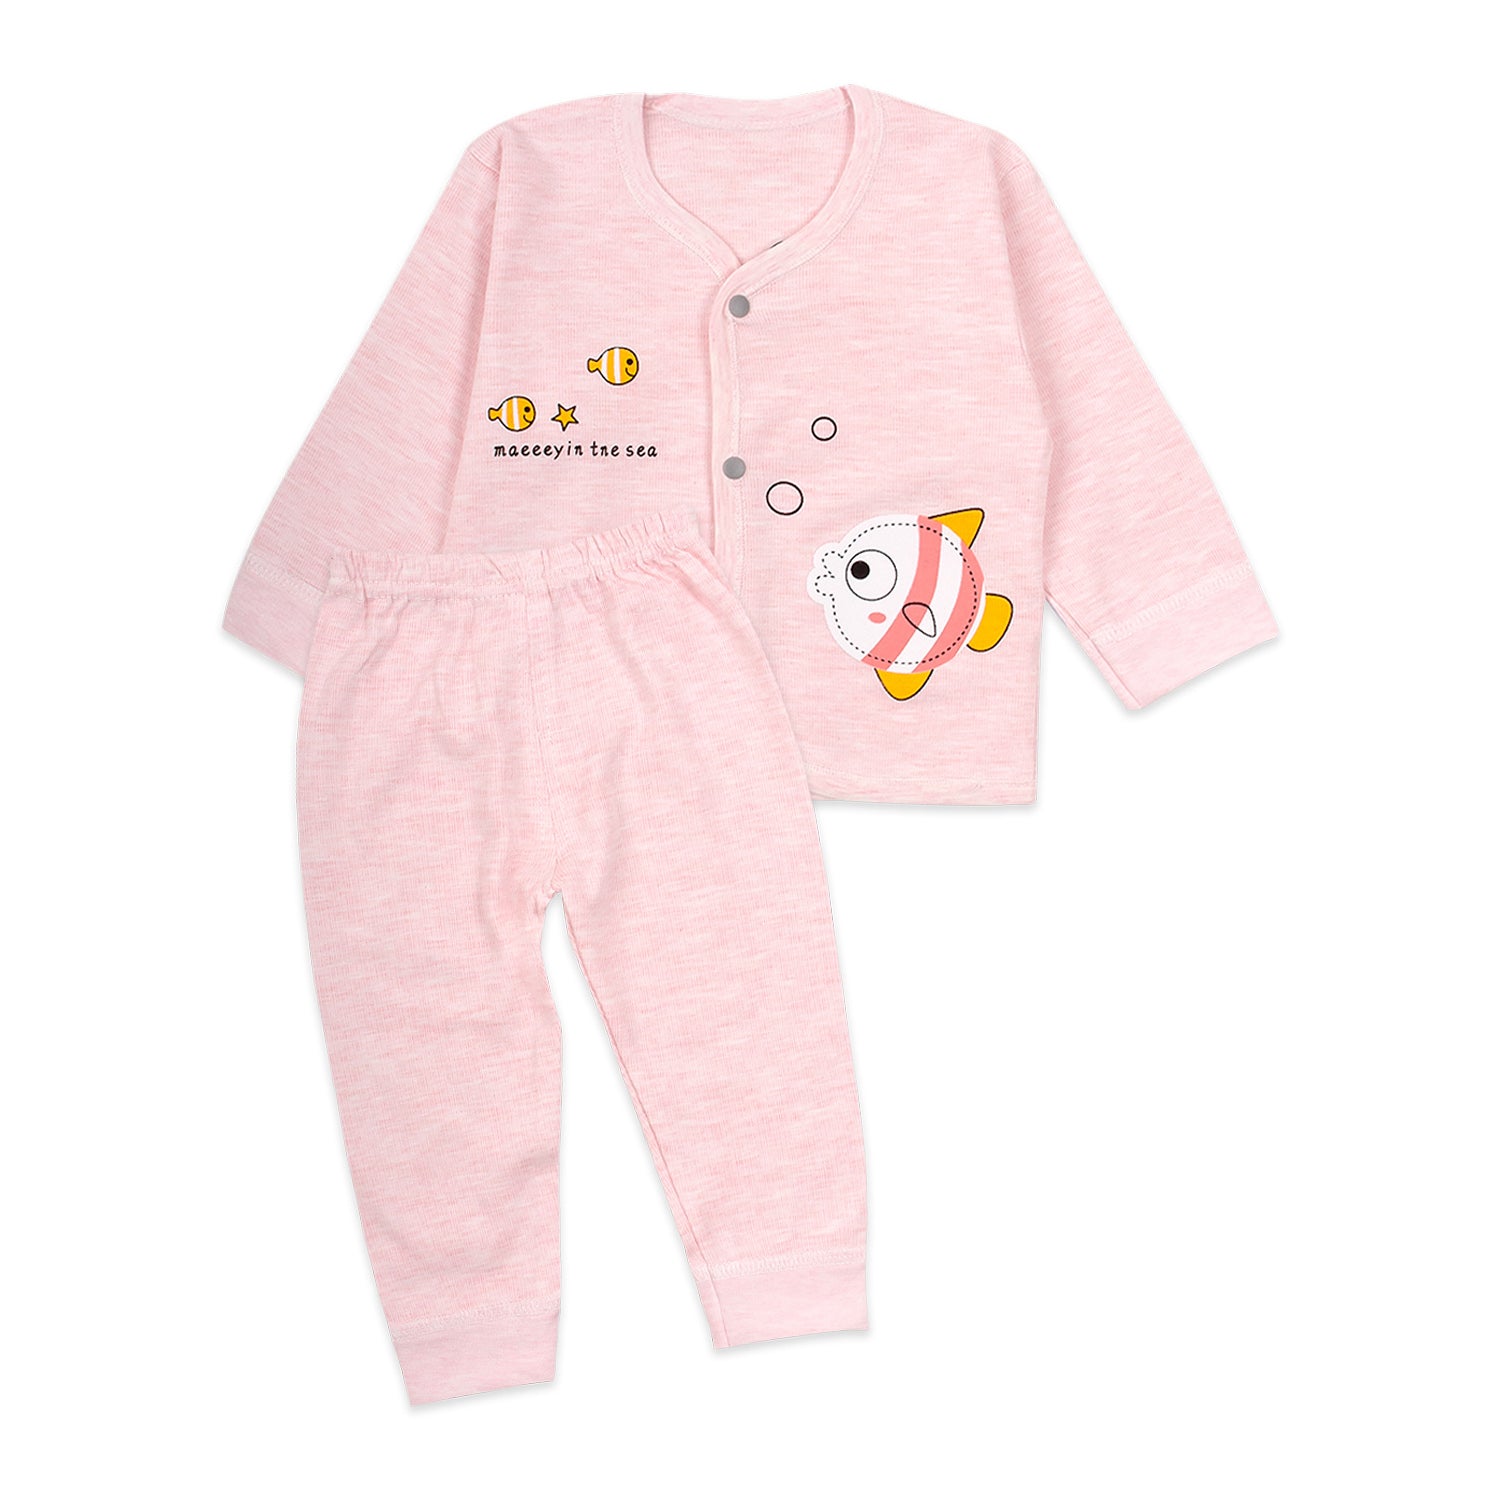 Baby's Warm Unisex Cotton Suit Set - 1 Pajama and 1 Shirt - Pink